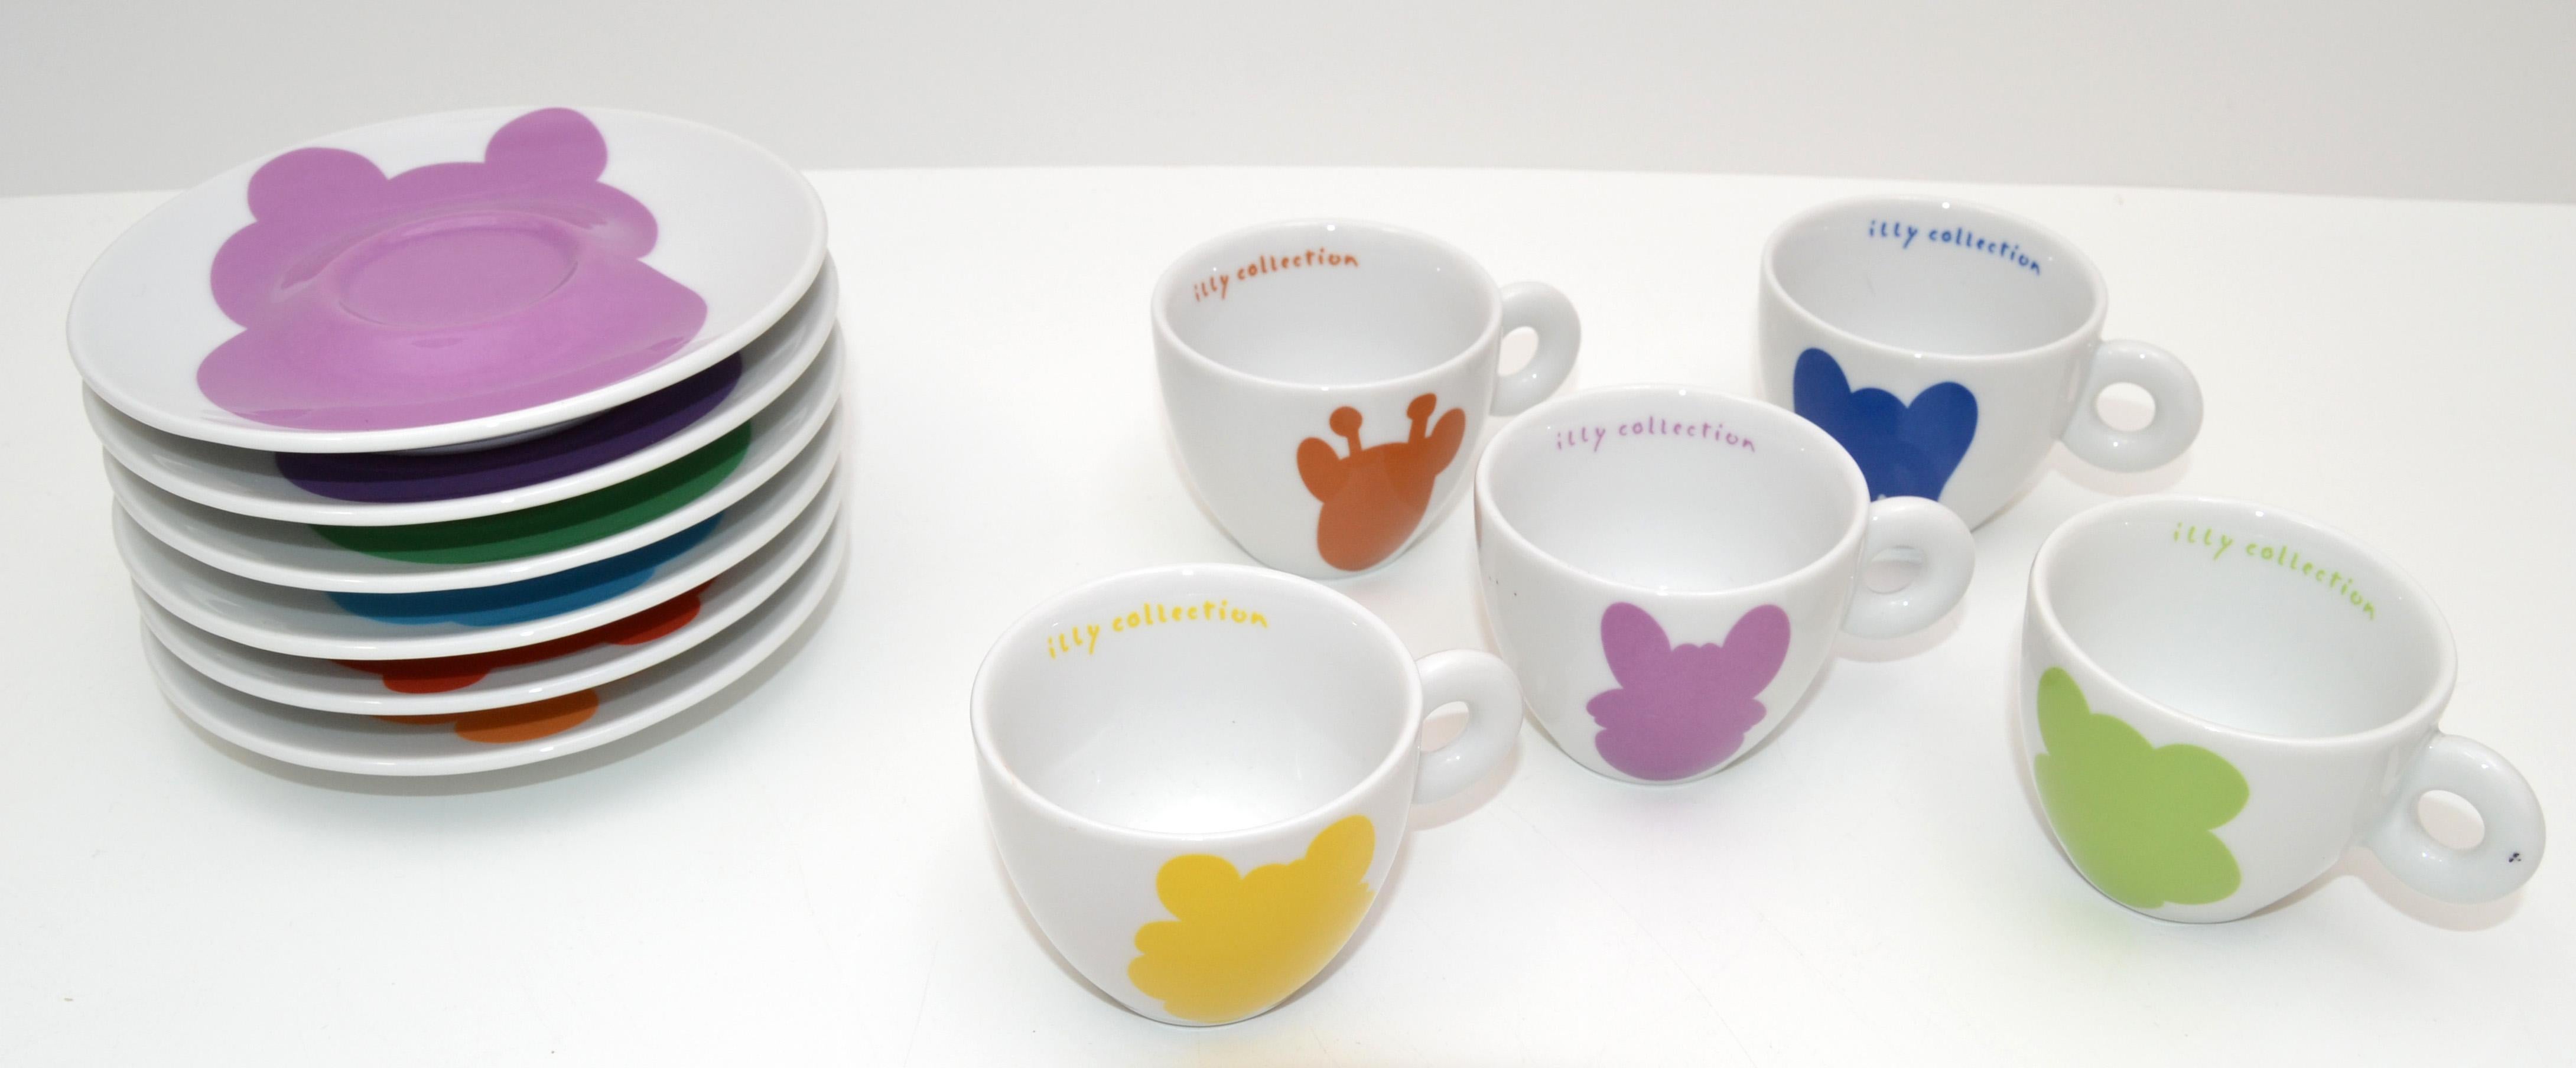 Modern Pop Art Illy Collection Espresso Service for five place setting designed by Jeff Koons made in Germany 2001 by Rosenthal.
5 signed, numbered cappuccino cups with Jeff Koons-signed decorated Rosenthal brand porcelain and 6 saucers.
Jeff Koons